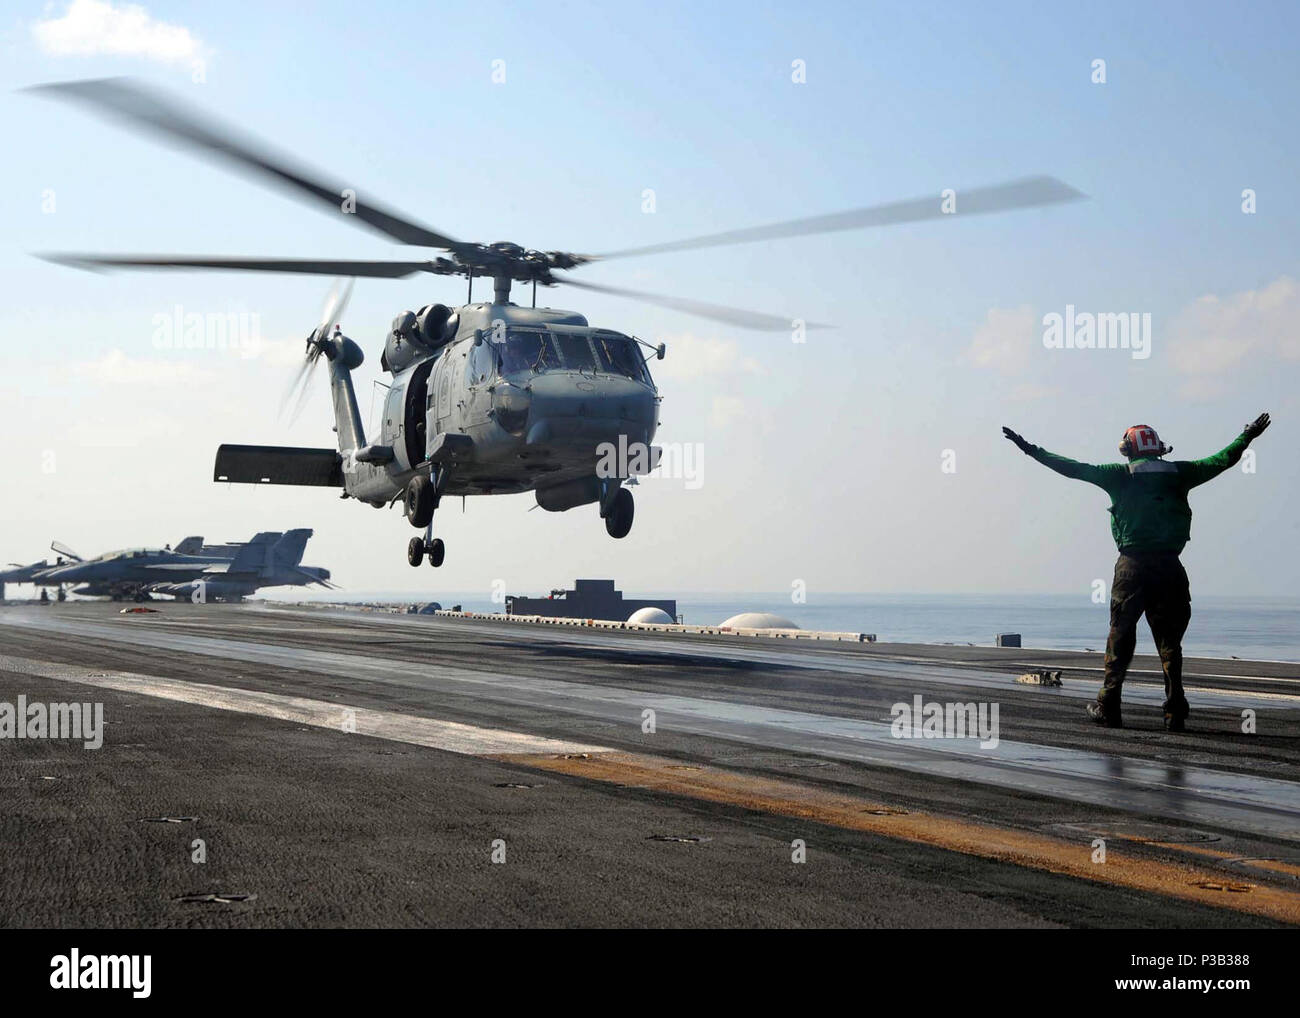 OF OMAN (Dec. 18, 2008) Cmdr. Scott 'Scotty High' Starkey lands an SH-60F Sea Hawk on the flight deck of the aircraft carrier USS Theodore Roosevelt (CVN 71) after his in-air change of command ceremony. Starkey relieved Cmdr. Mark 'Bad Andy' Truluck as commanding officer of the 'Tridents' of Helicopter Anti-Submarine Squadron (HS) 3. Theodore Roosevelt and Carrier Air Wing (CVW) 8 are conducting operations in the U.S. 5th Fleet area of responsibility and are focused on reassuring regional partners of the United States' commitment to security, which promotes stability and global prosperity. Stock Photo